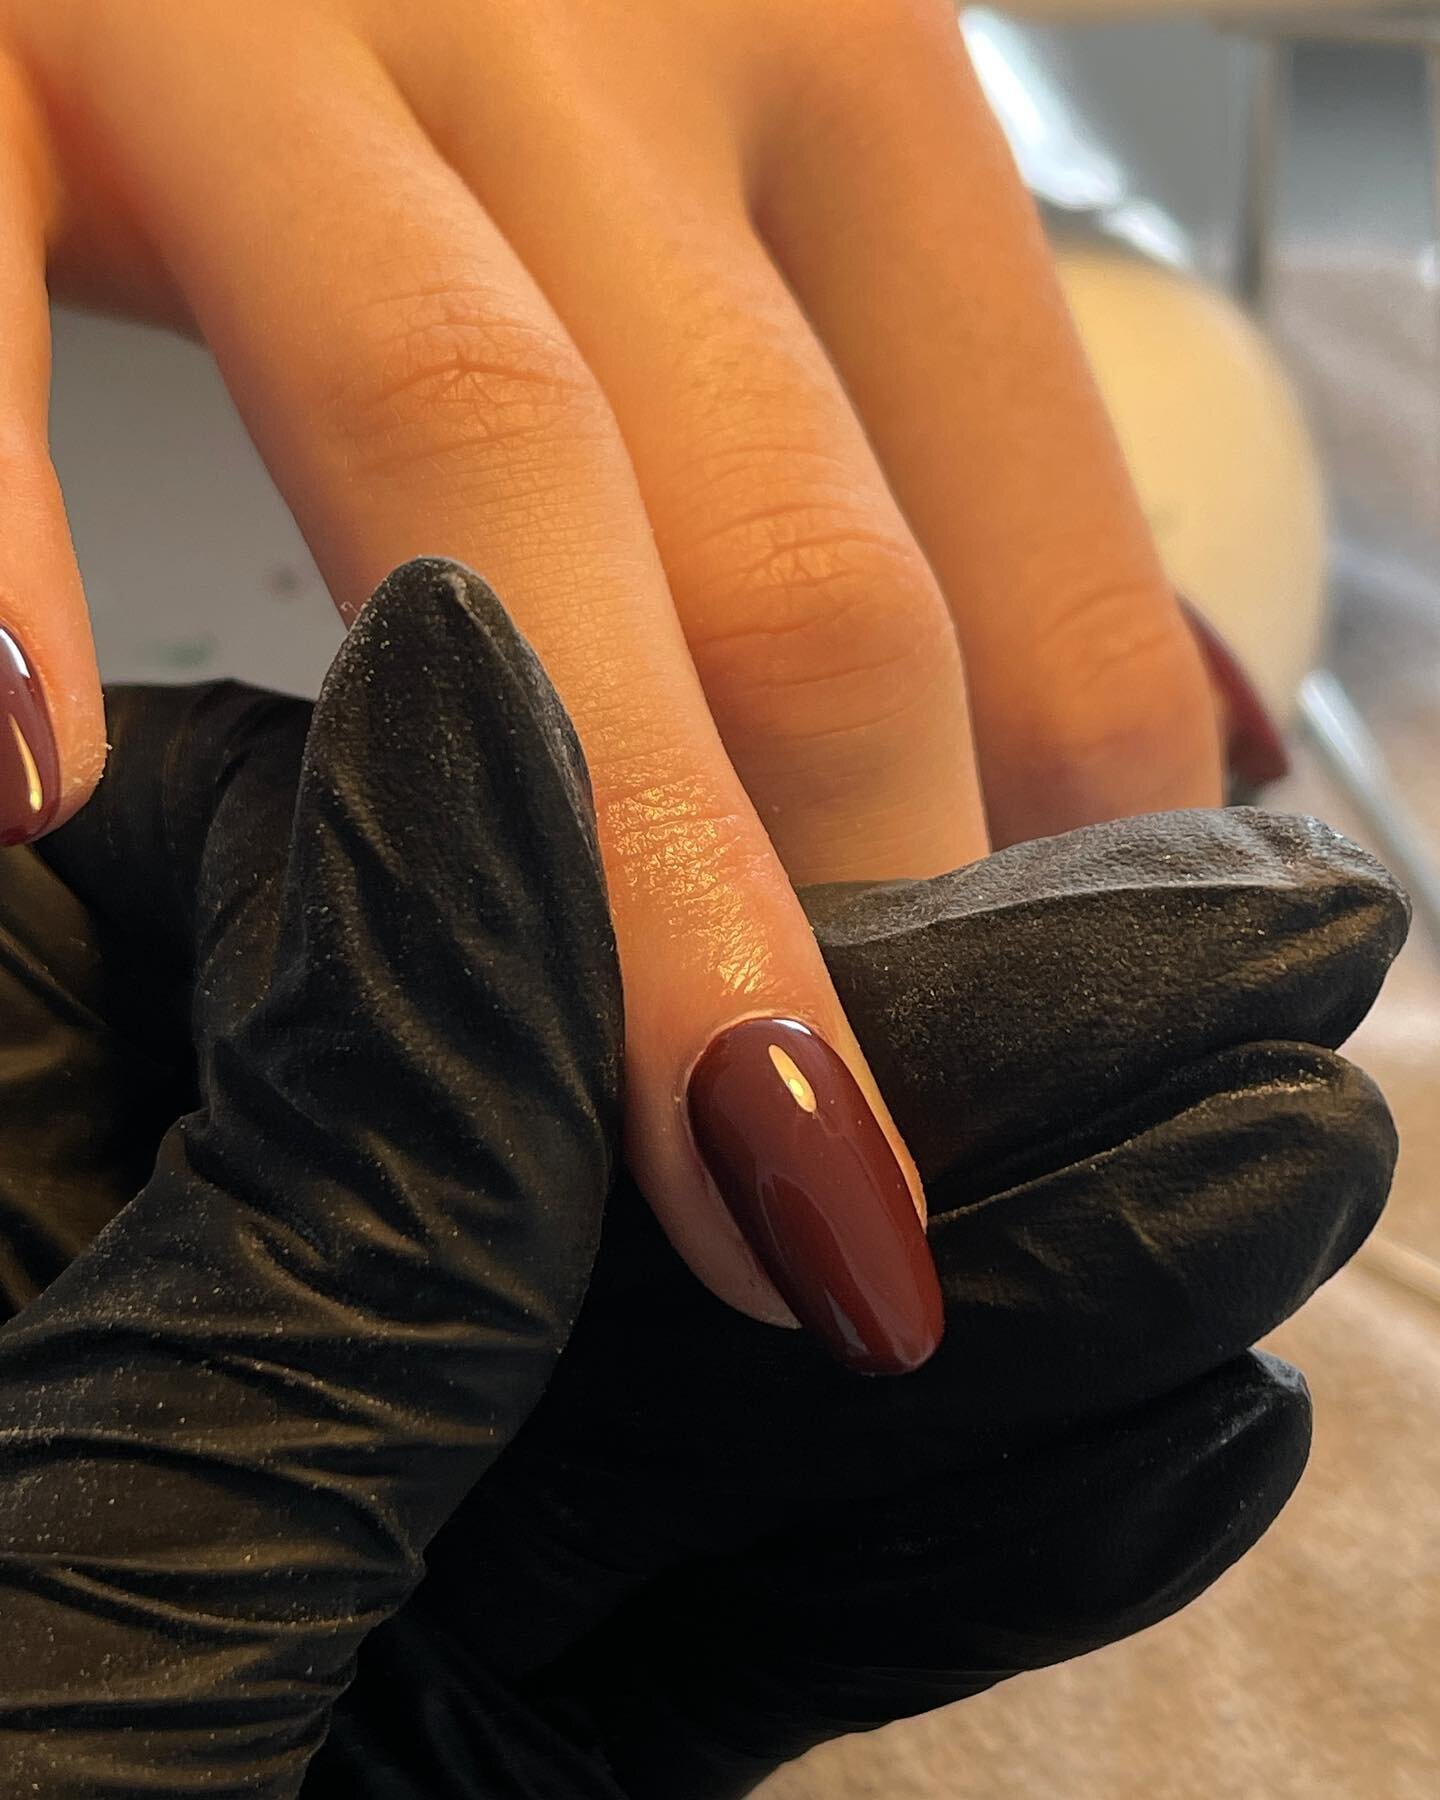 Builder Gel Overlay (BIAB)

Using @the_gelbottle_inc 
All in One BIAB
After Dark

Almond shape nails are so beautiful, these nails are all my clients own no extension that&rsquo;s the beauty of builder gel! 

📍 Based in Dual strength and fitness in 